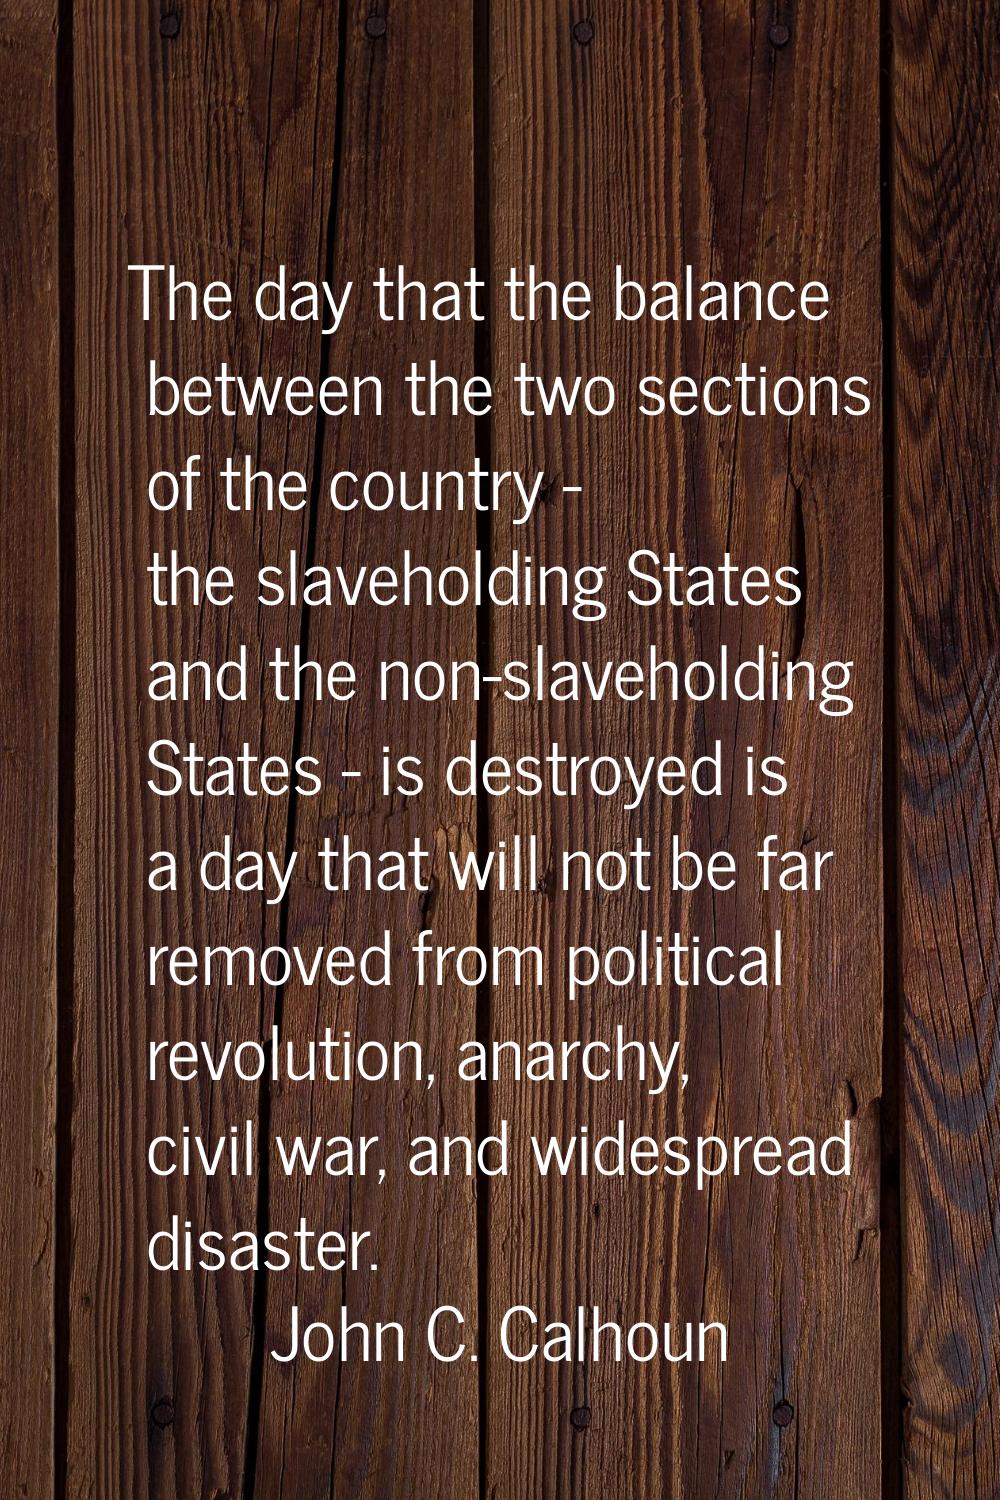 The day that the balance between the two sections of the country - the slaveholding States and the 